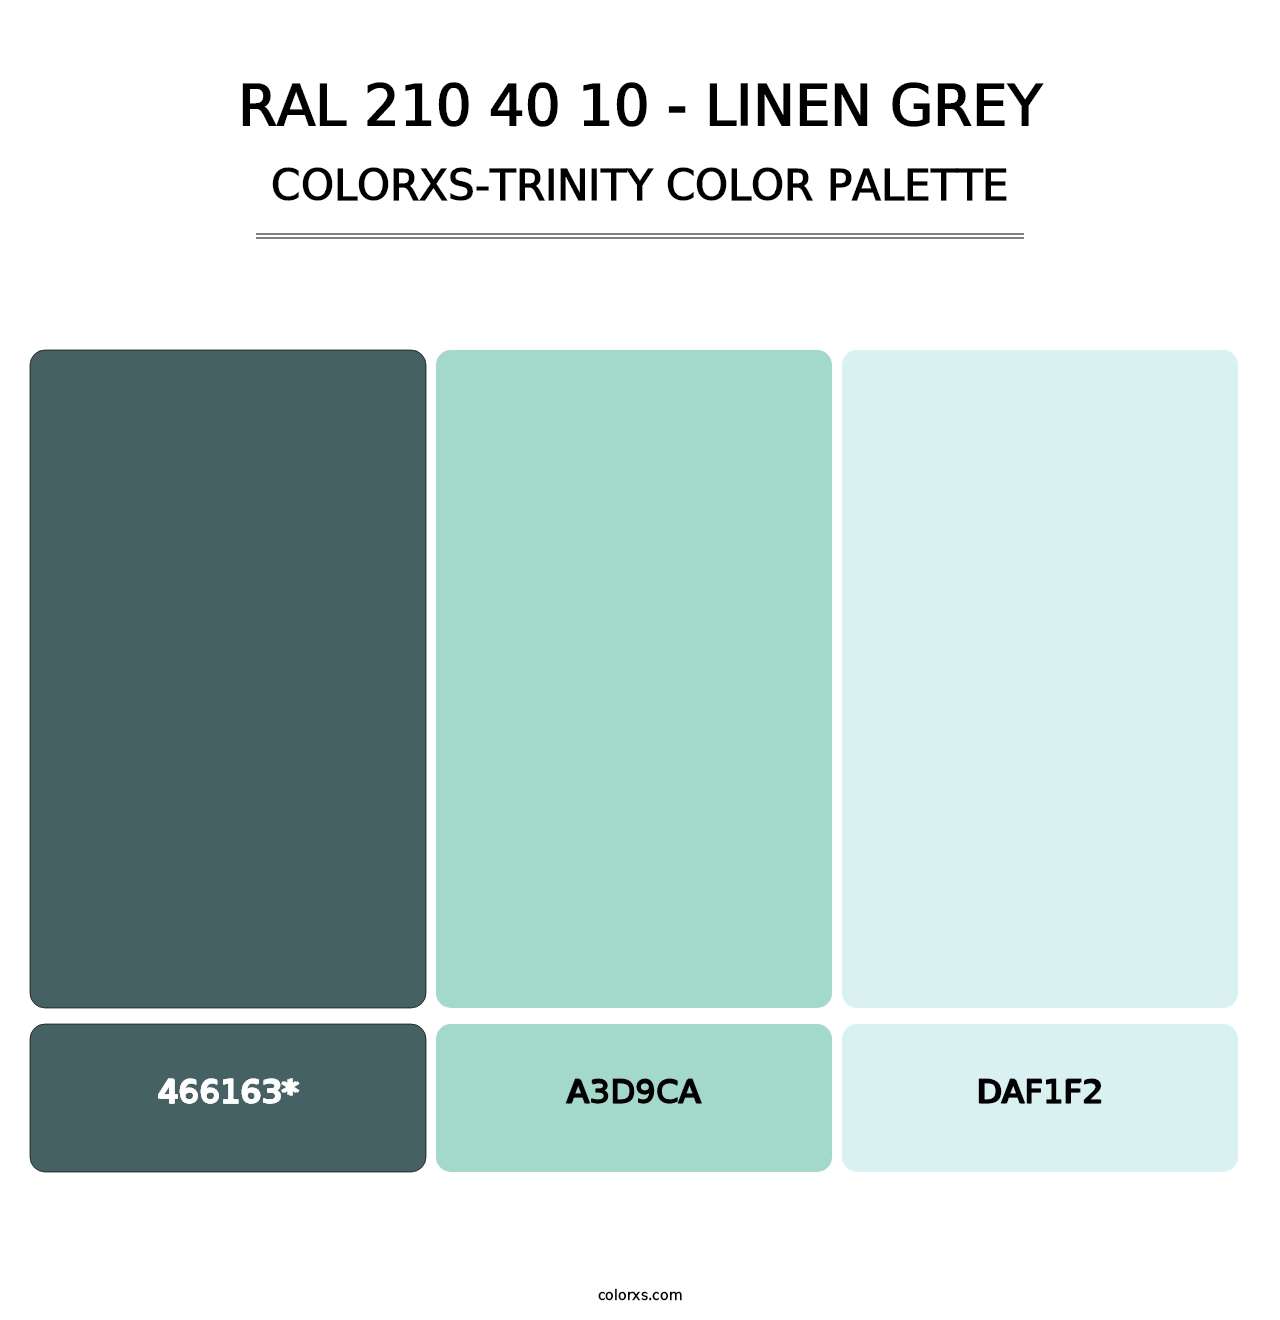 RAL 210 40 10 - Linen Grey - Colorxs Trinity Palette